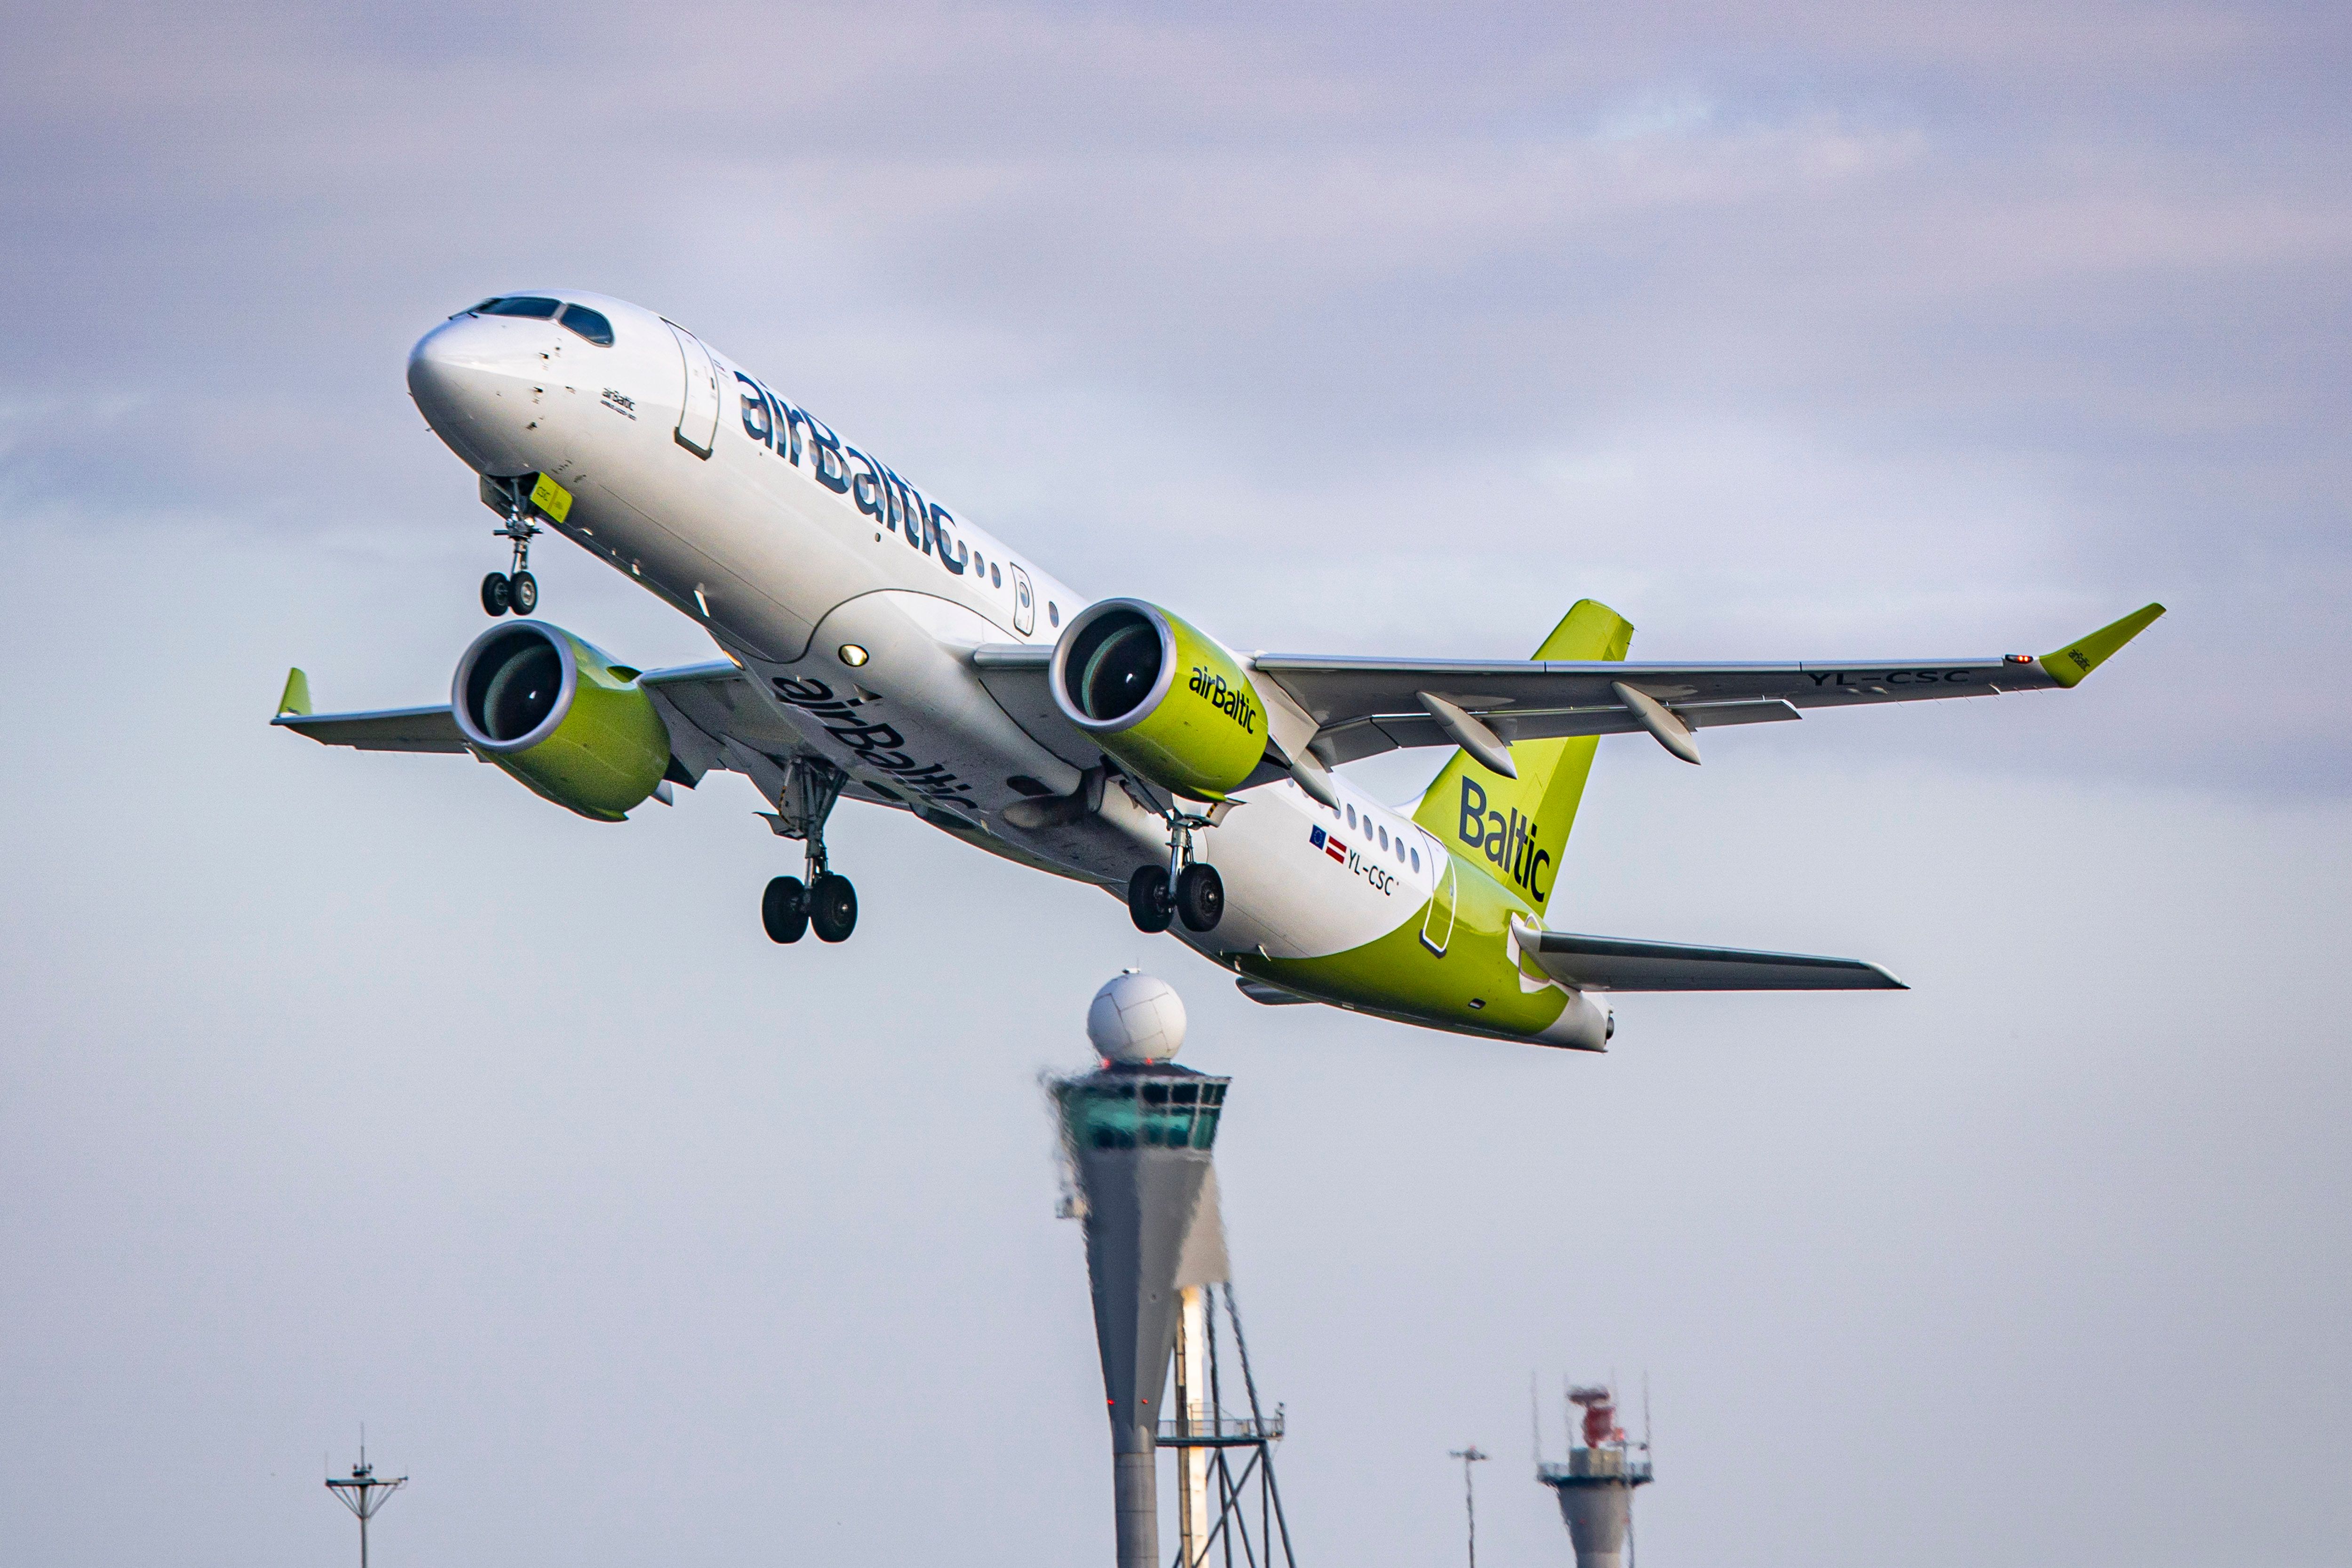 airBaltic Airbus A220-300 aircraft as seen departing from Amsterdam Schiphol Airport. 